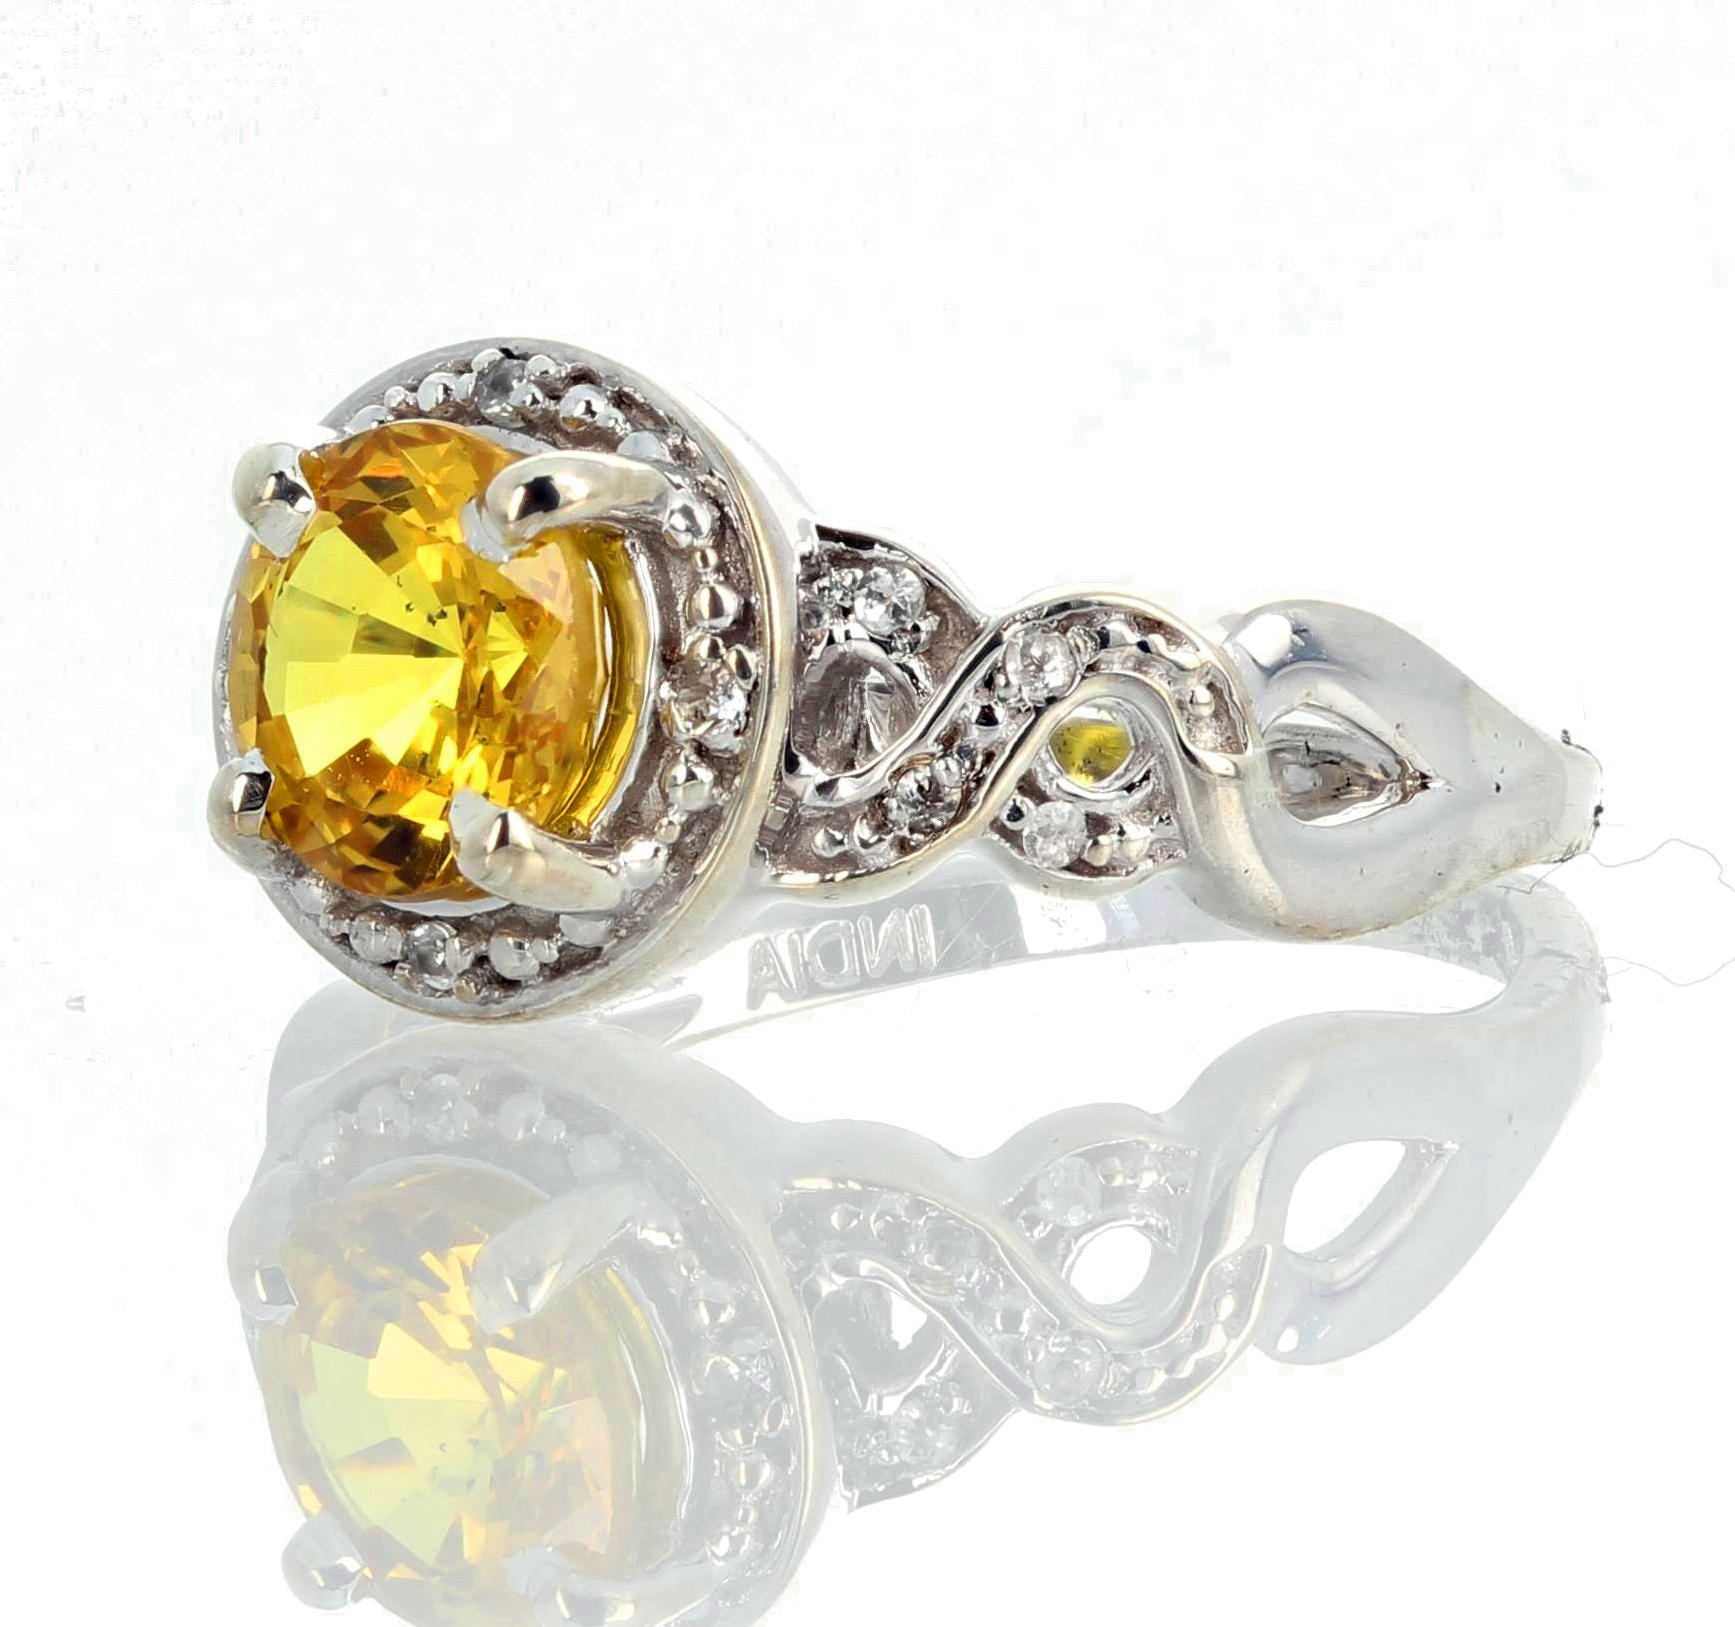 Very rear intense brilliant yellow 1.3 Carat (7 mm) Spinel enhanced with teeny tiny white Diamonds set in this lovely sterling silver platinum plated ring size 7.5 sizable for free.   This sparkles intensely for evening events.   